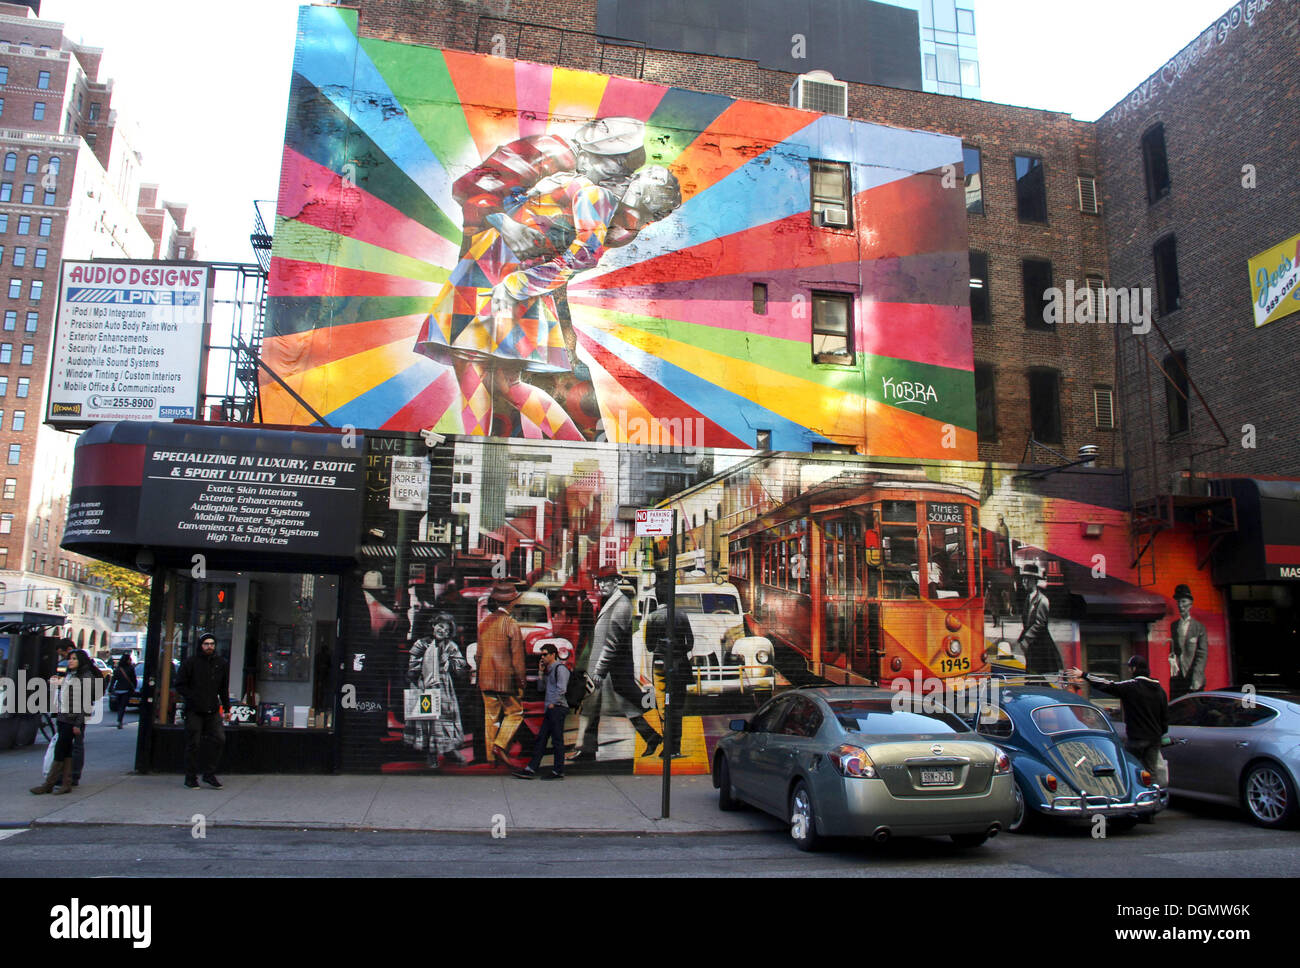 New York, New York, USA. 21st Oct, 2013. A view of the mural 'Love is in the Air' by Brazilian artist Eduardo Kobra located on West 25th Street and 10th Avenue in West Chelsea. The mural reworks the famous Eisenstaedt's 1945 'VJ in Times Square' photo. Kobra is known for his massive murals around the world infusing vibrant colors and iconic nostalgic scenes from the early 20th Century. © Nancy Kaszerman/ZUMAPRESS.com/Alamy Live News Stock Photo